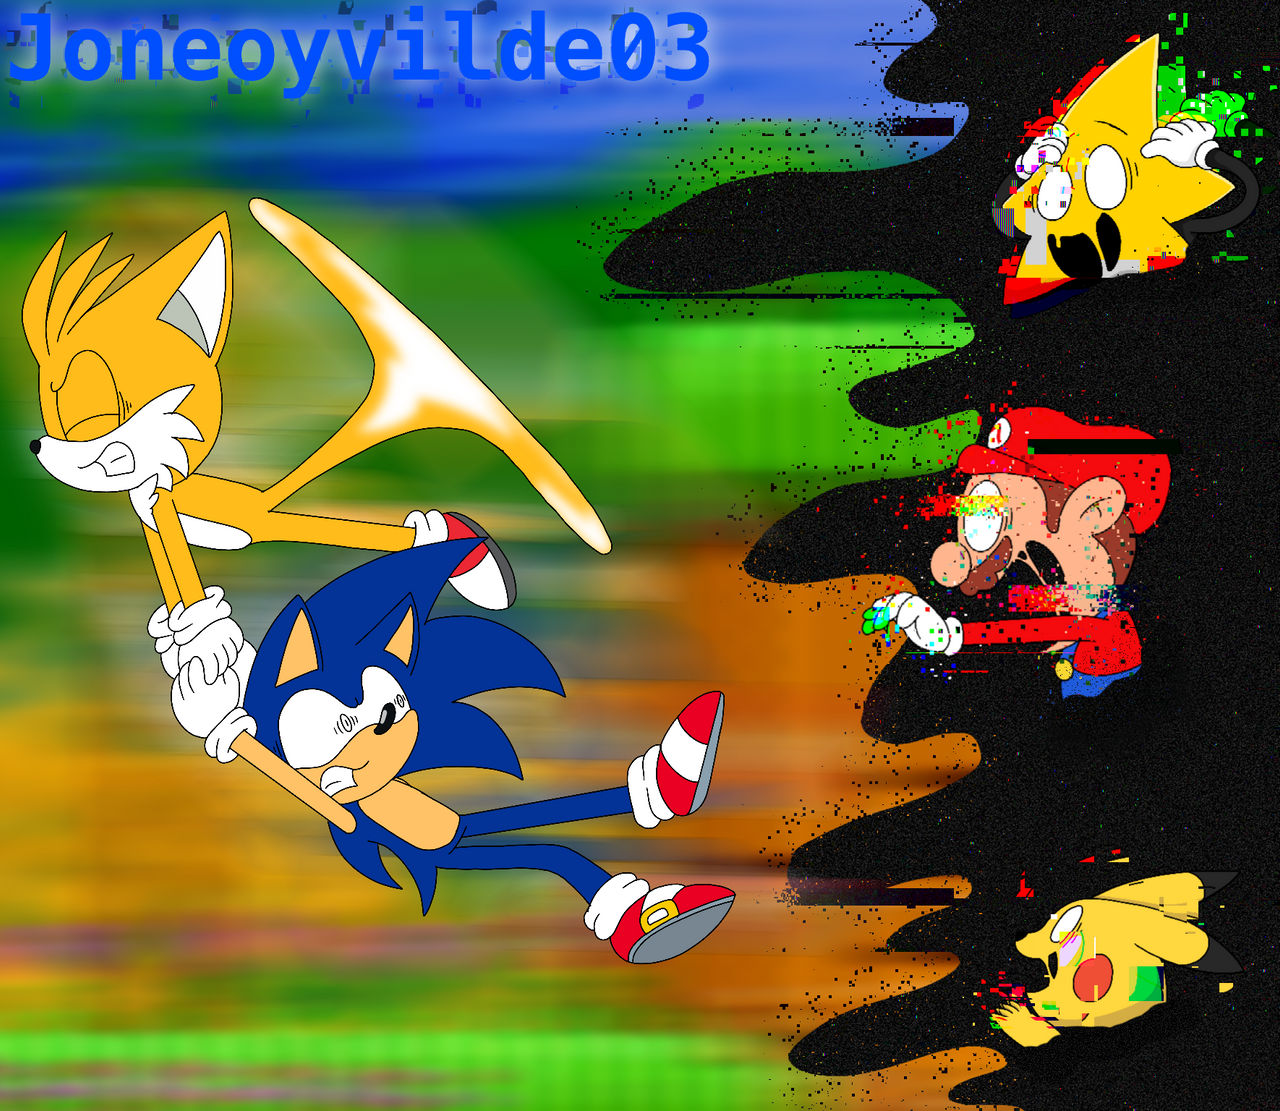 Sonicpiz on X: When I unlocked Super Tails on Sonic 3 and